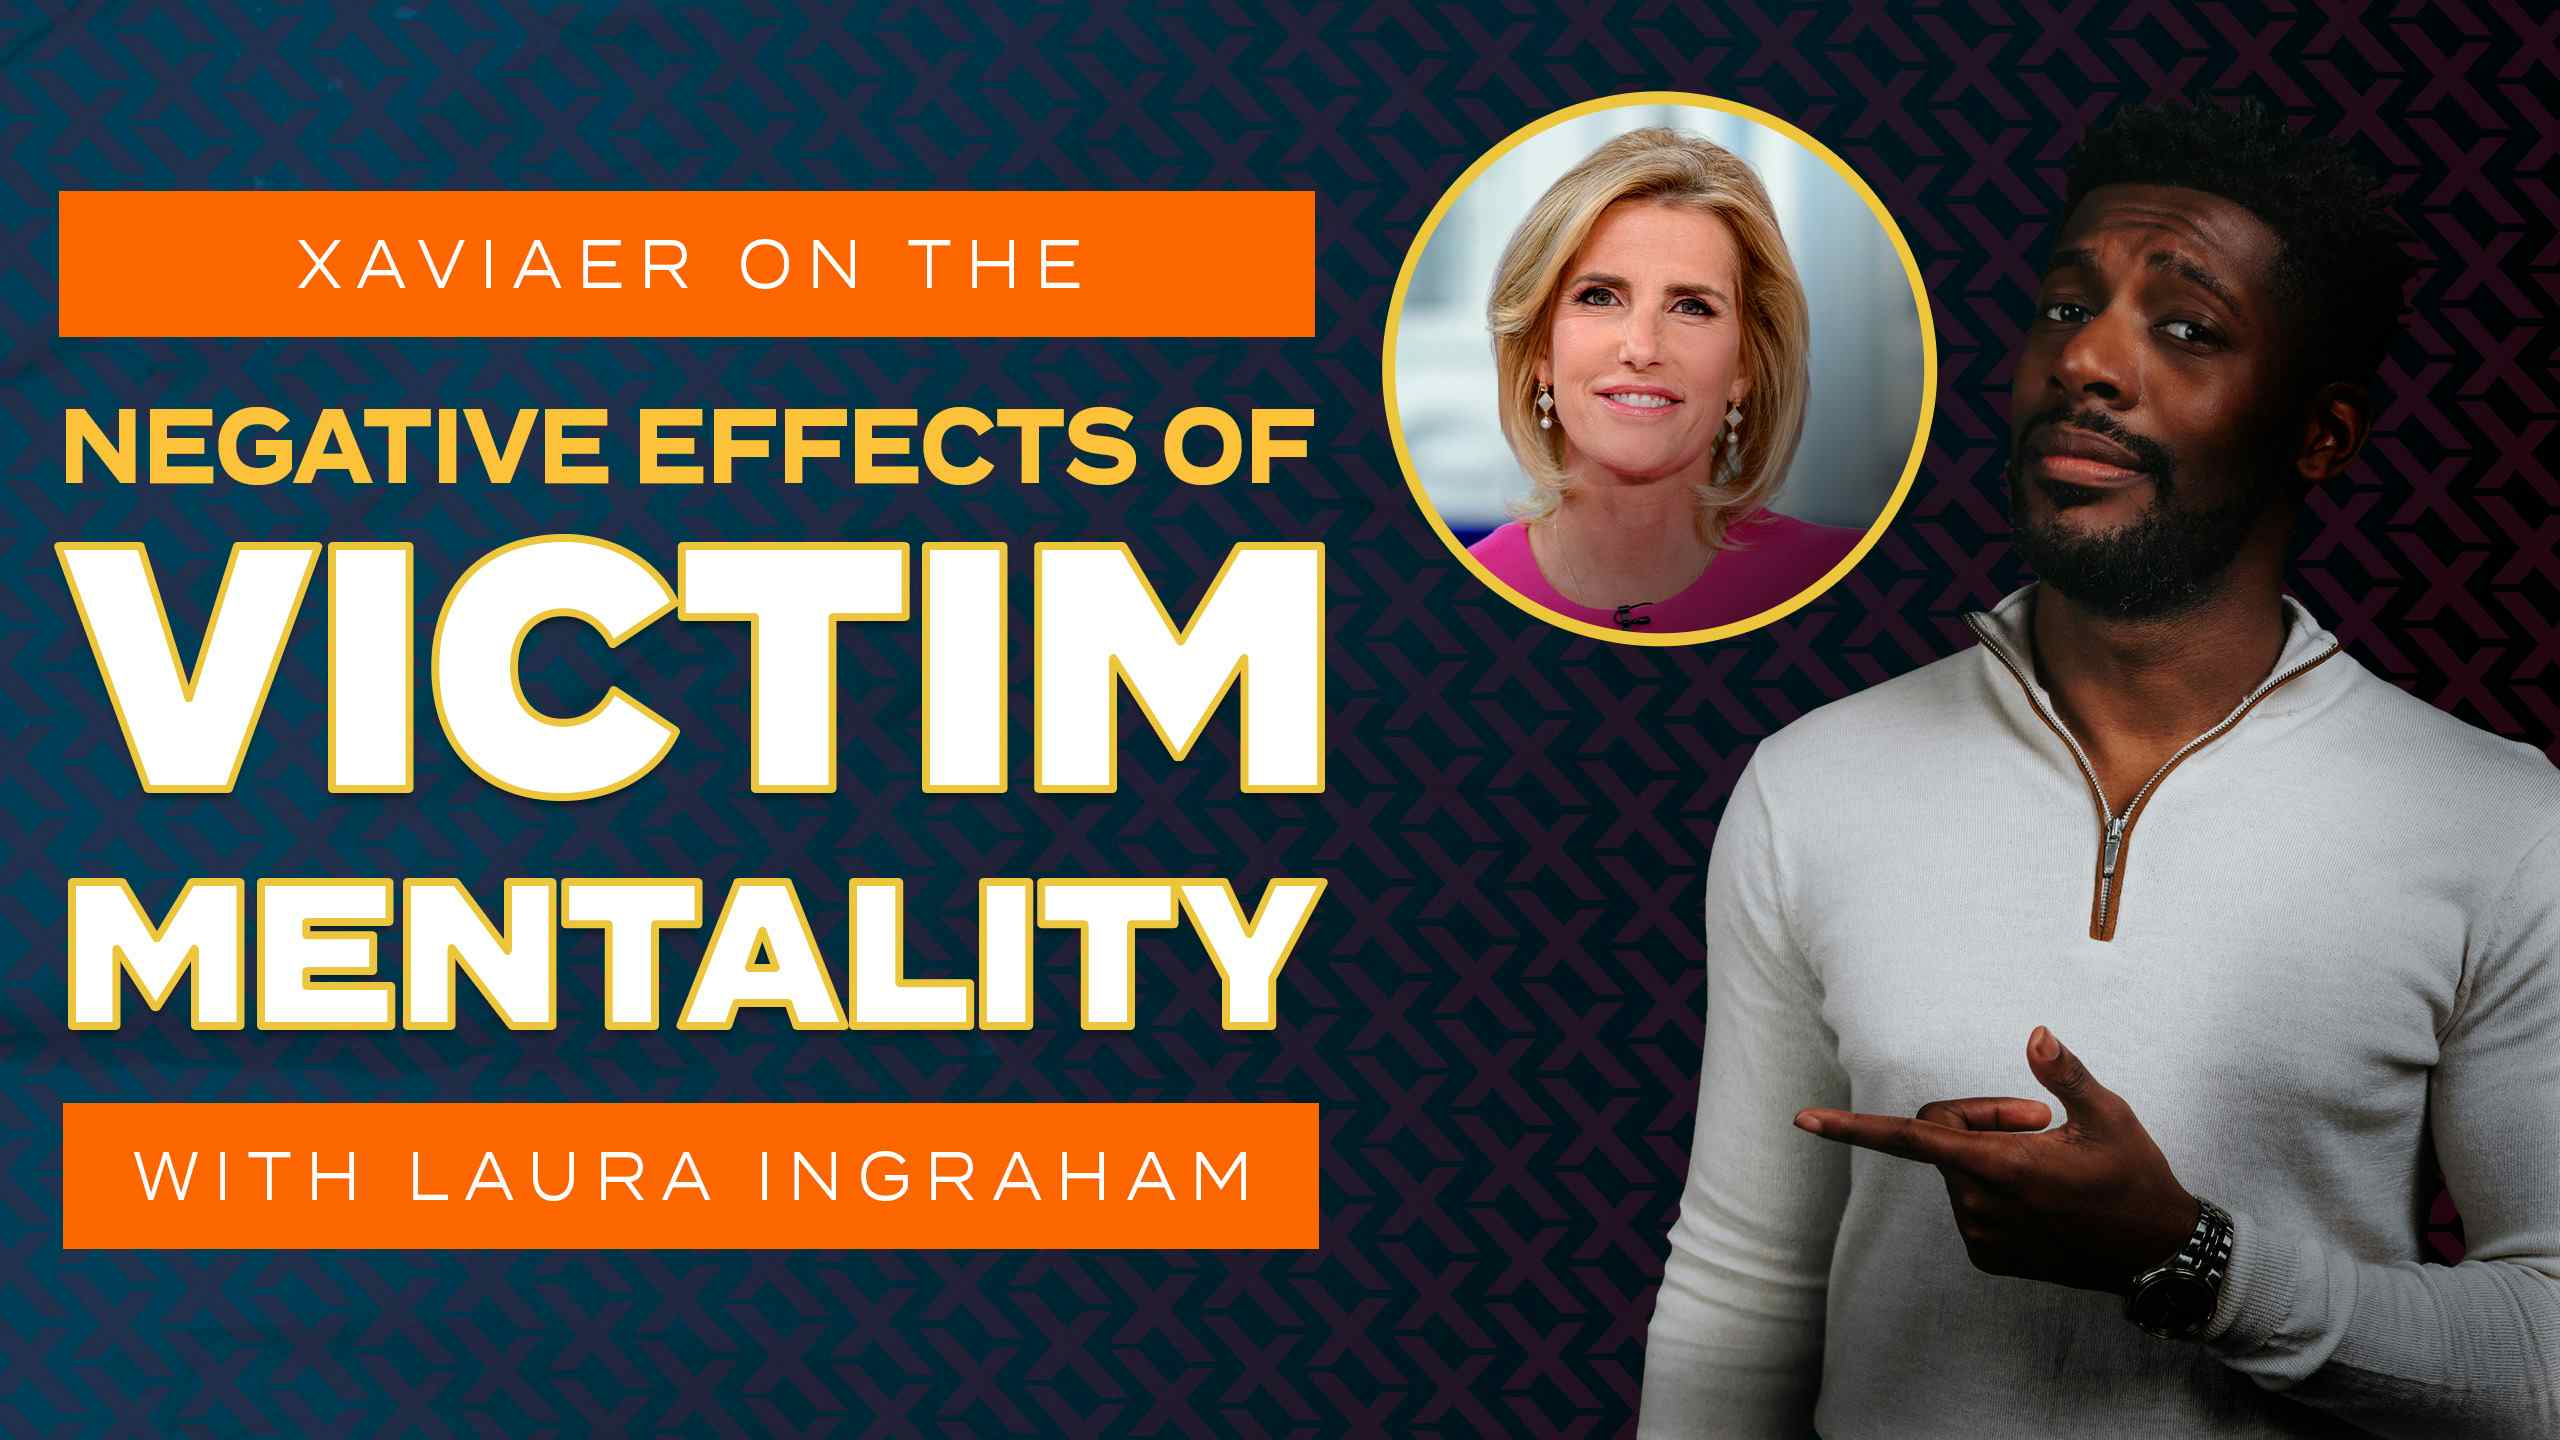 Xaviaer on the Negative Effects of Victim Mentality with Laura Ingraham